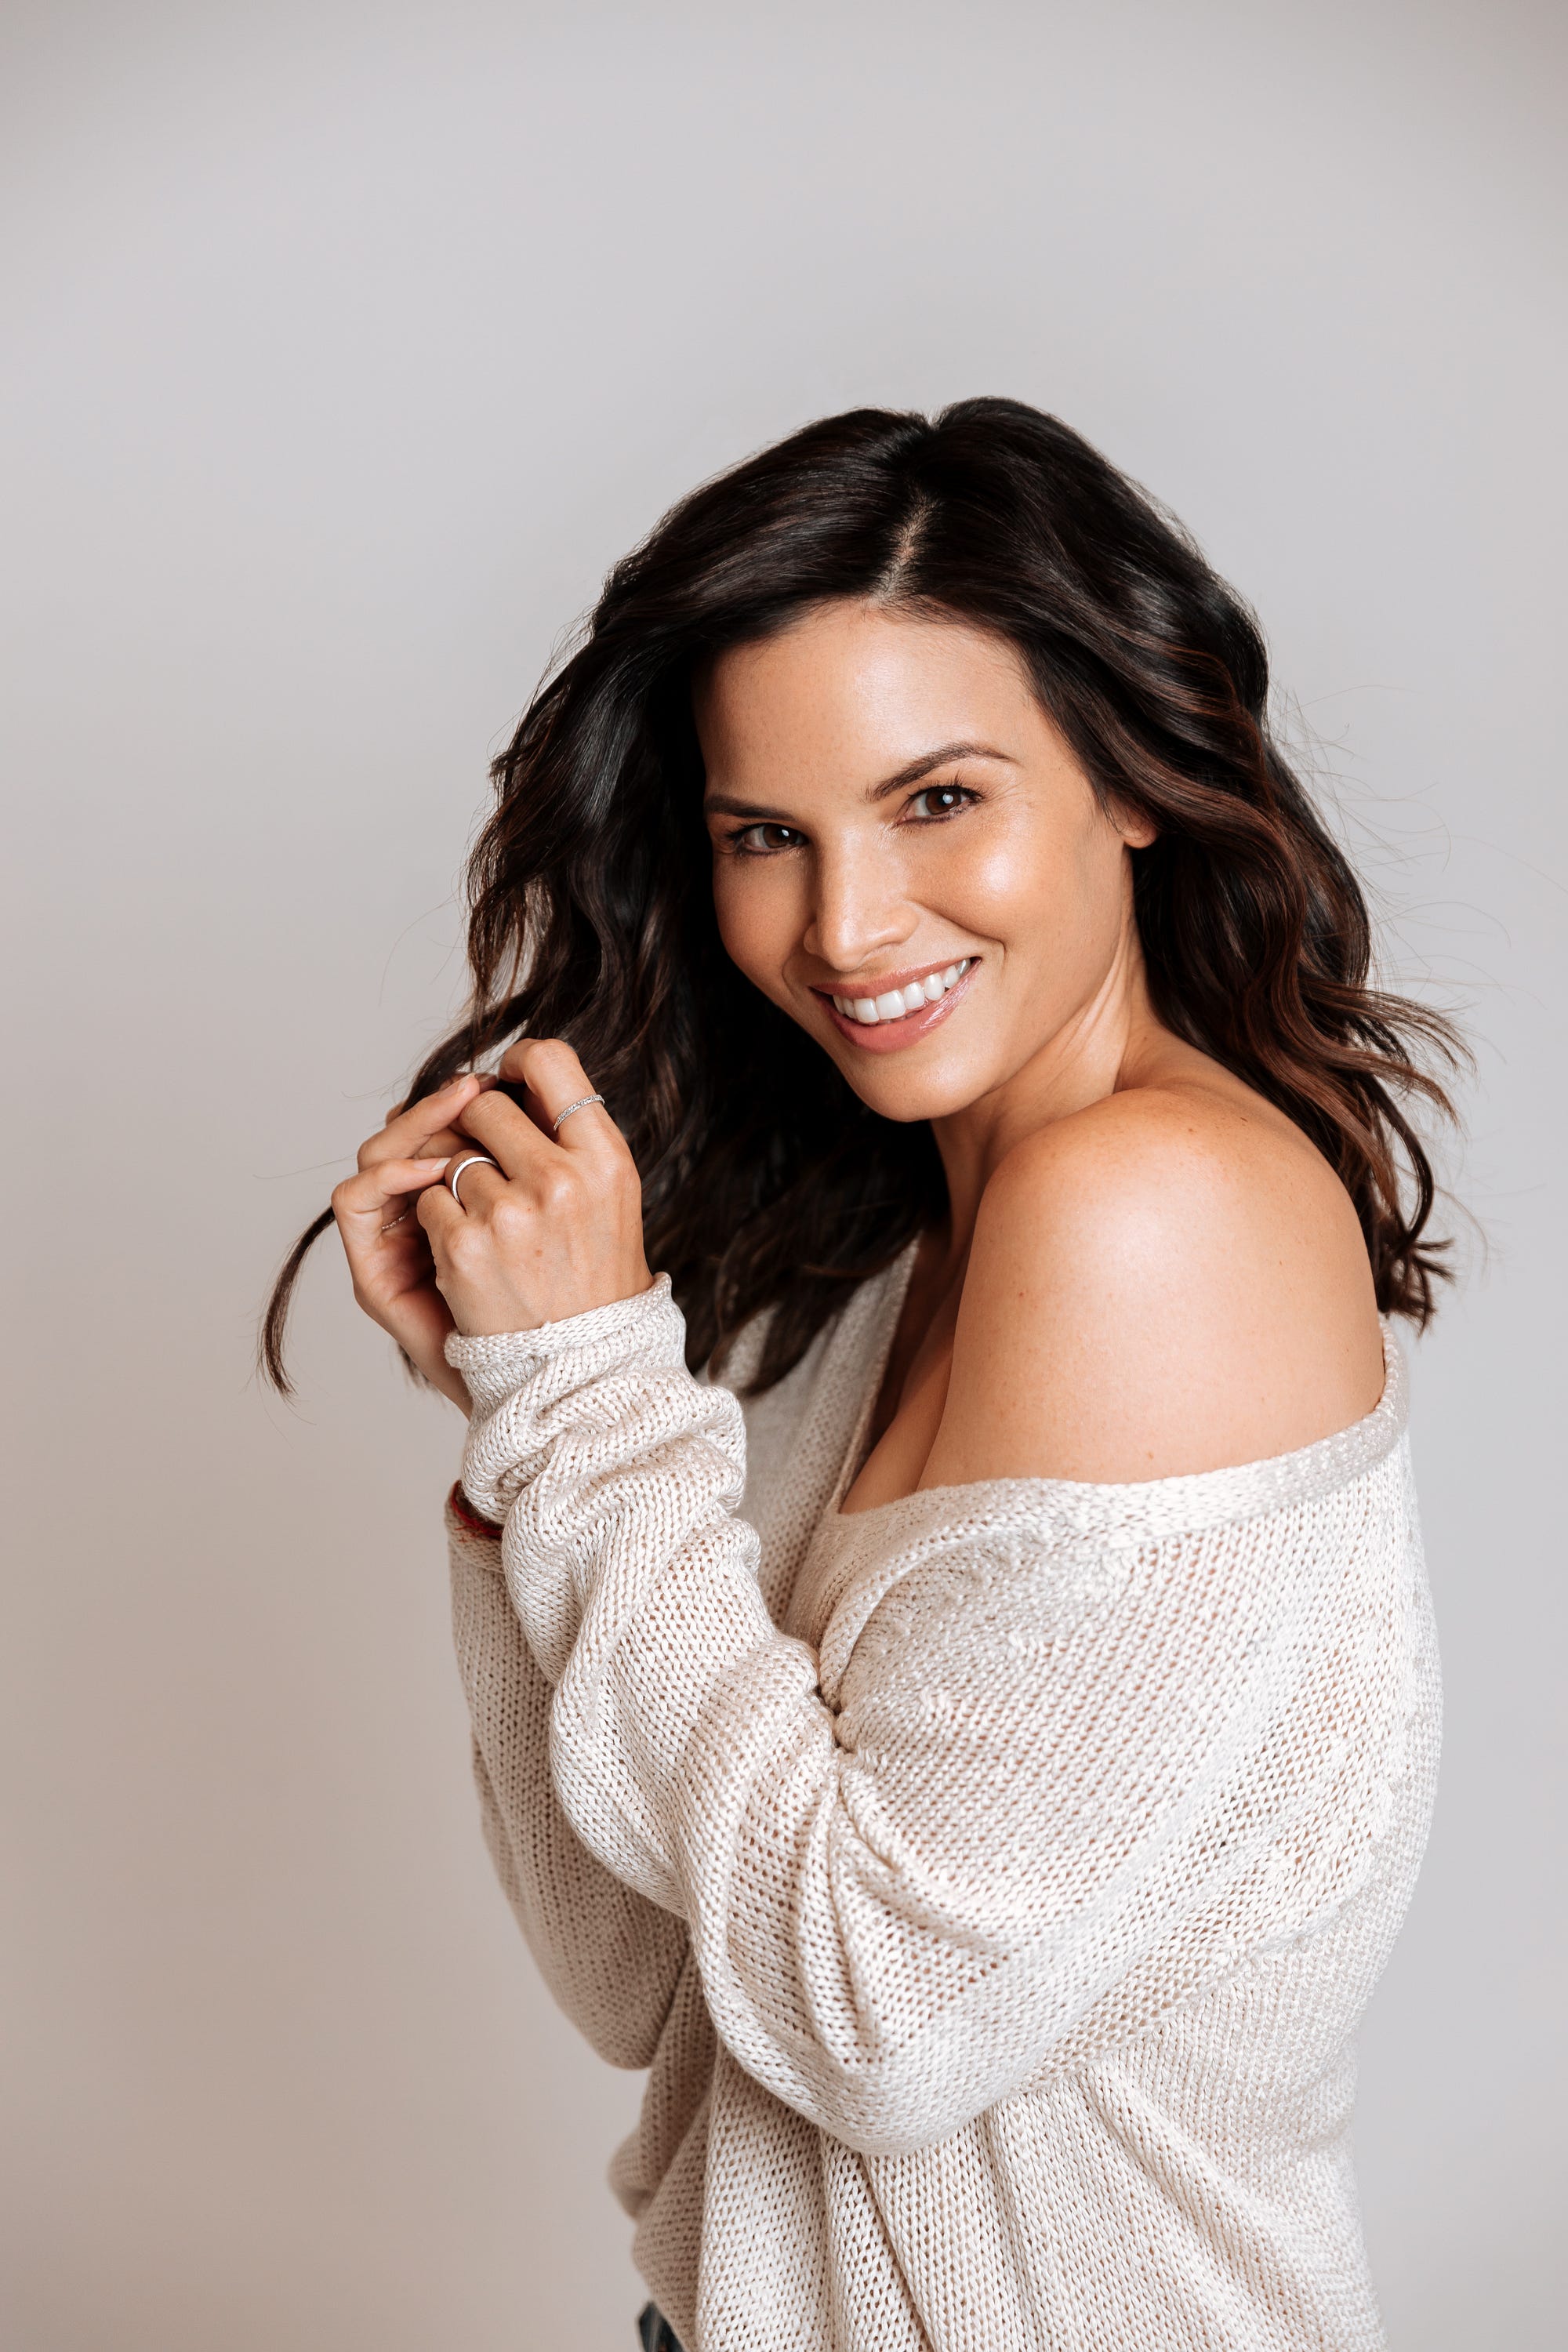 Katrina Law Of NCIS On The Five Things You Need To Shine In The  Entertainment Industry | by Yitzi Weiner | Authority Magazine | Medium